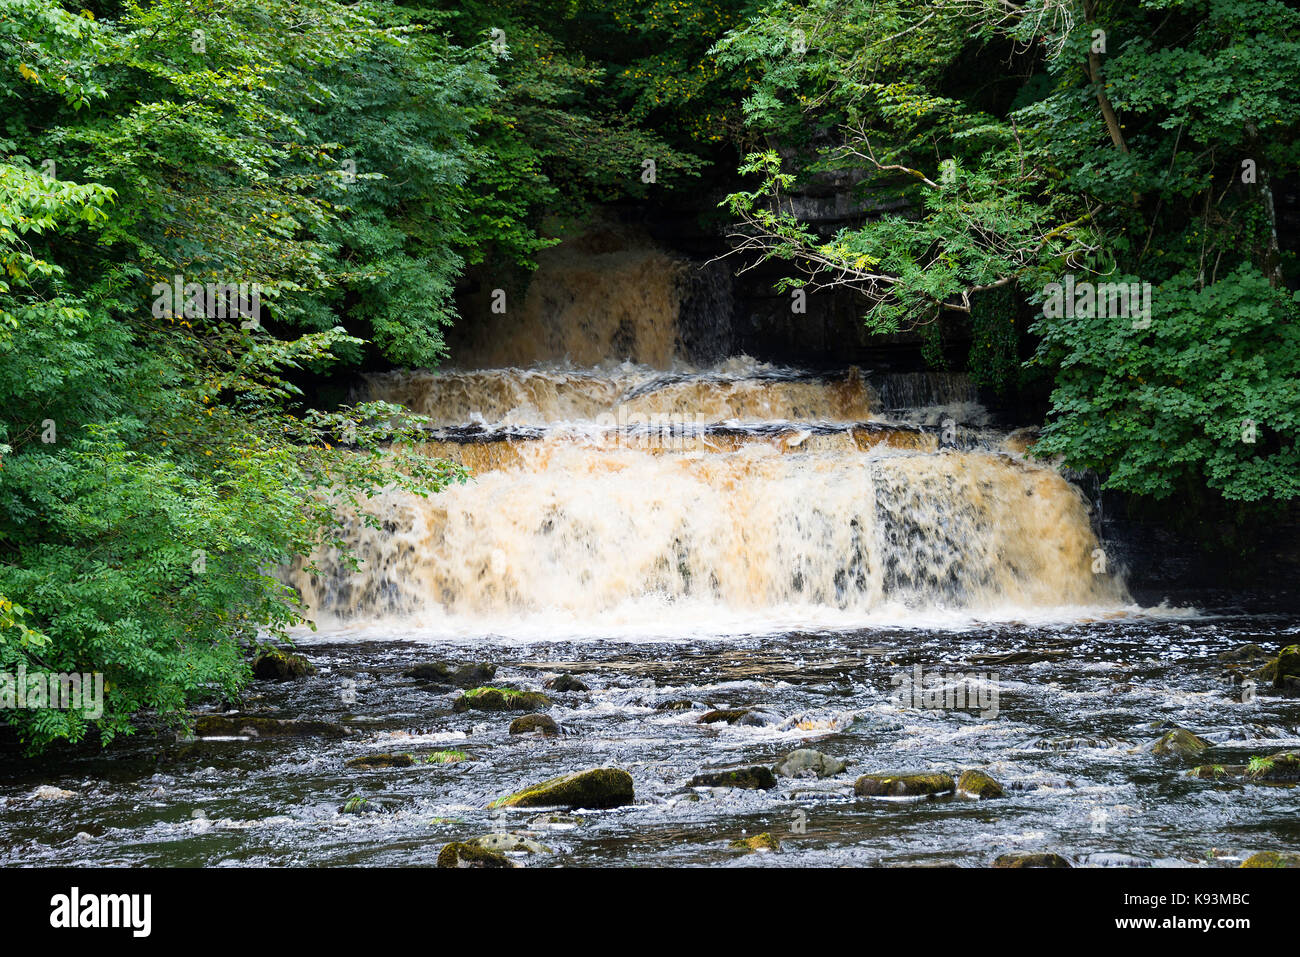 The Beautiful Cotter Force Waterfall on Cotter Beck Near Hawes in The Yorkshire Dales National Park Yorkshire England United Kingdom UK Stock Photo